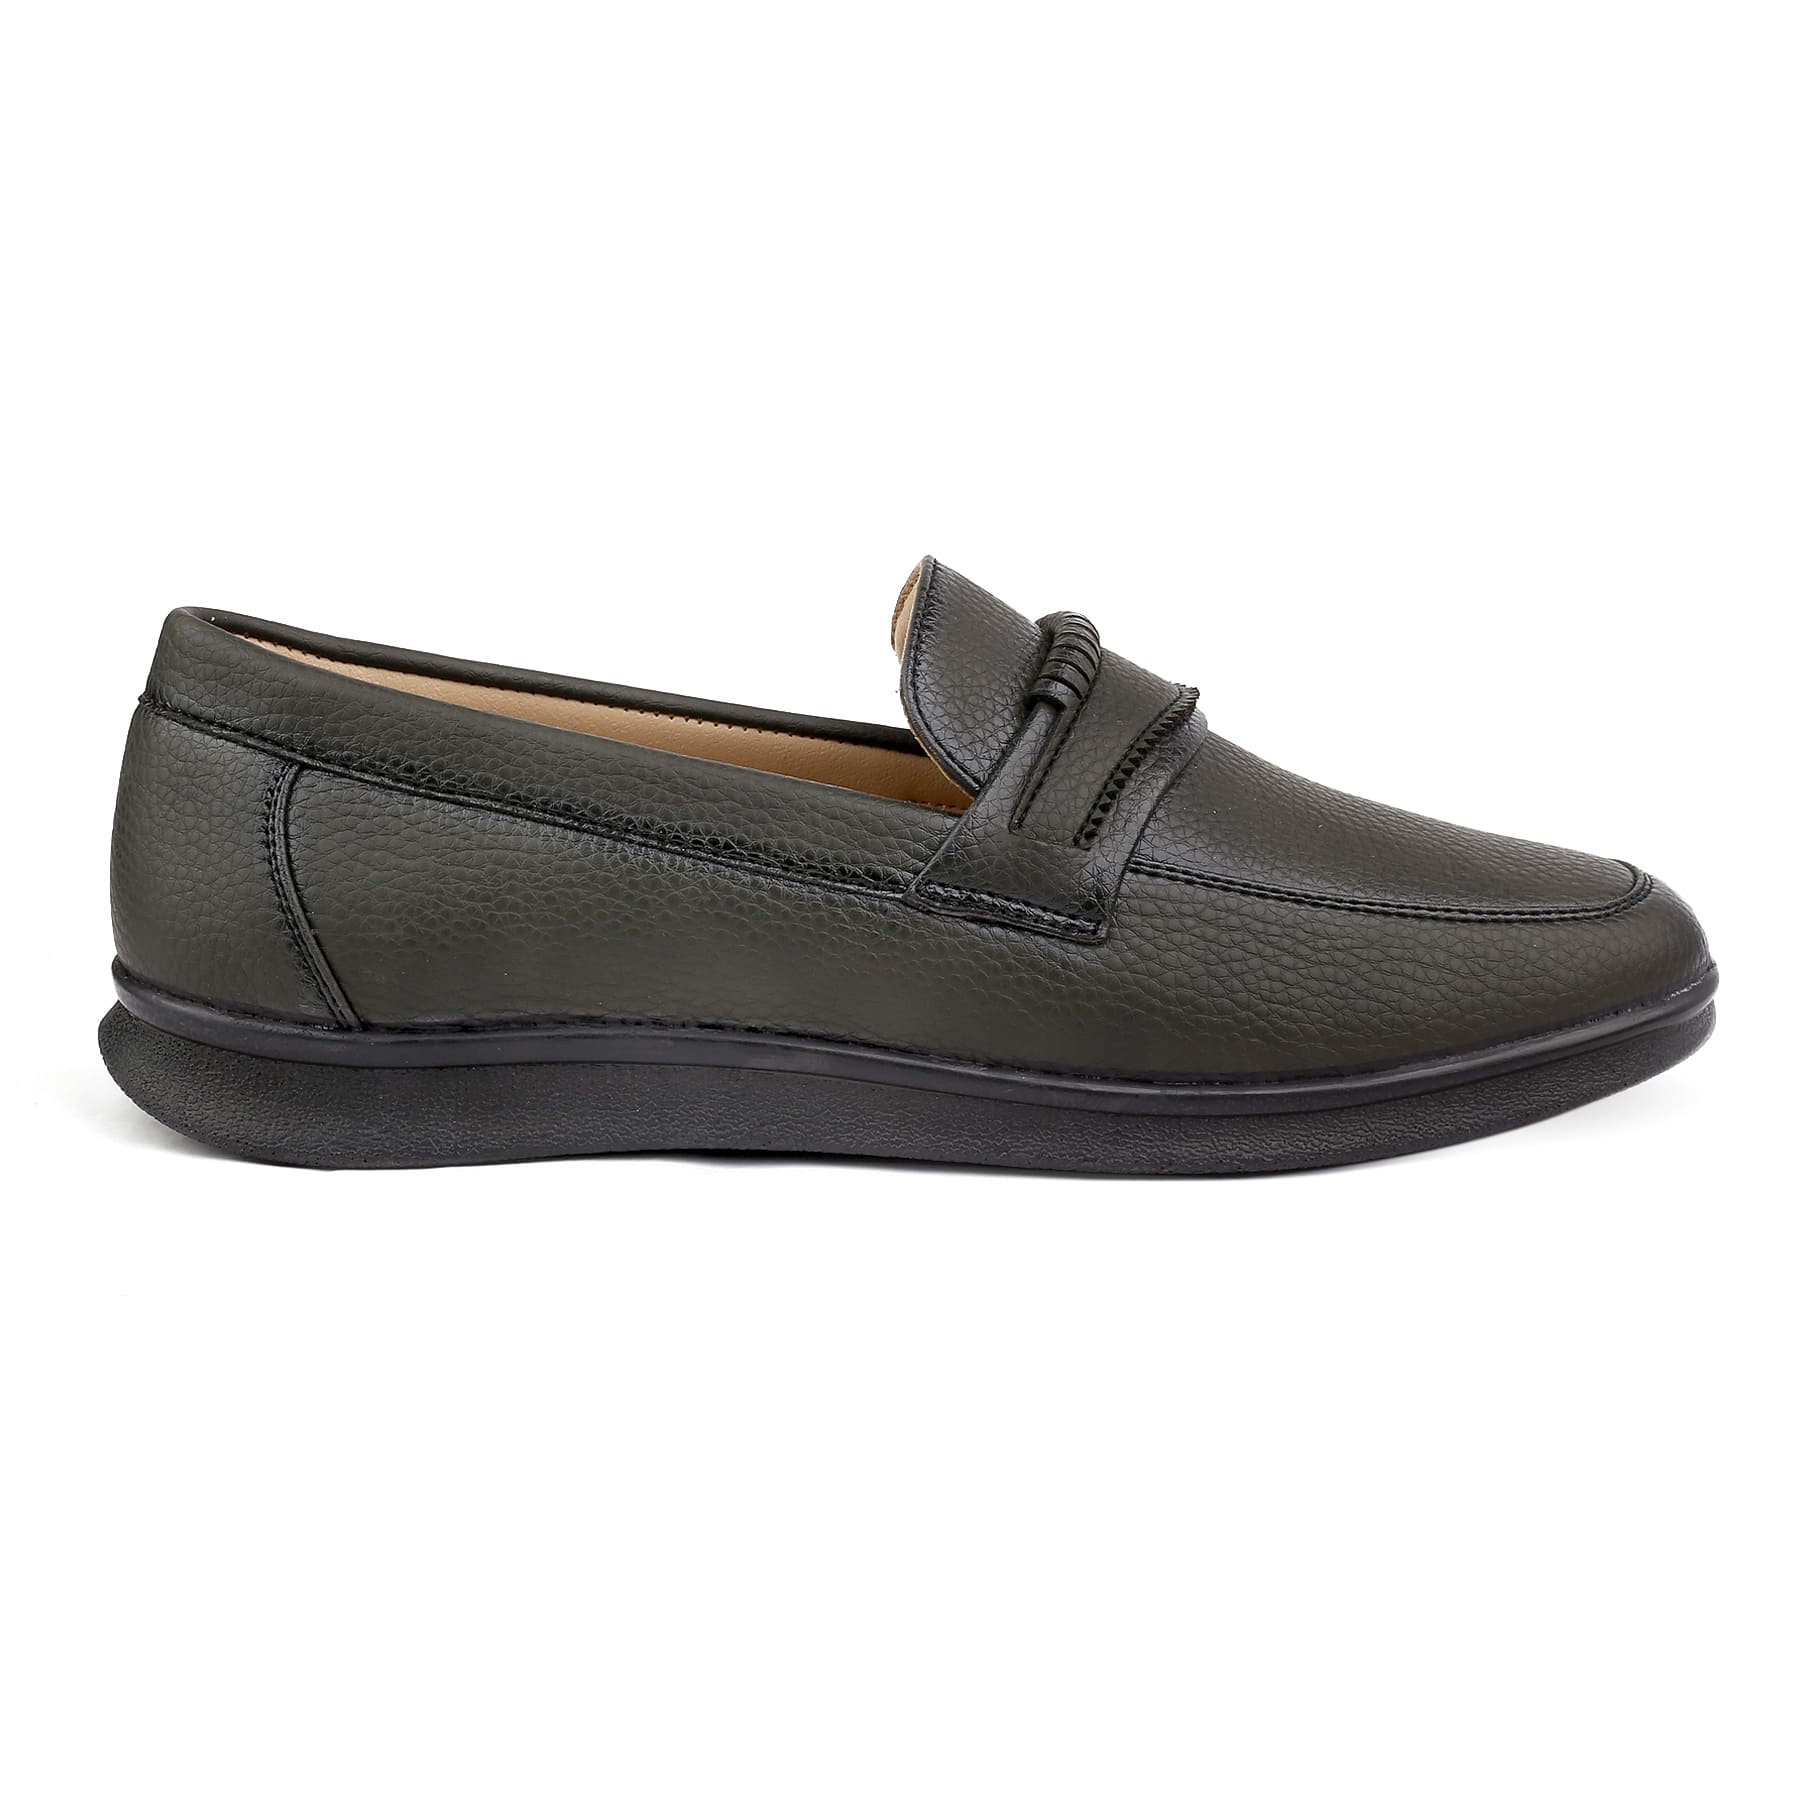 Bacca Bucci Men's LUNA Casual Slip-On Loafers Moccasins Driving Shoes